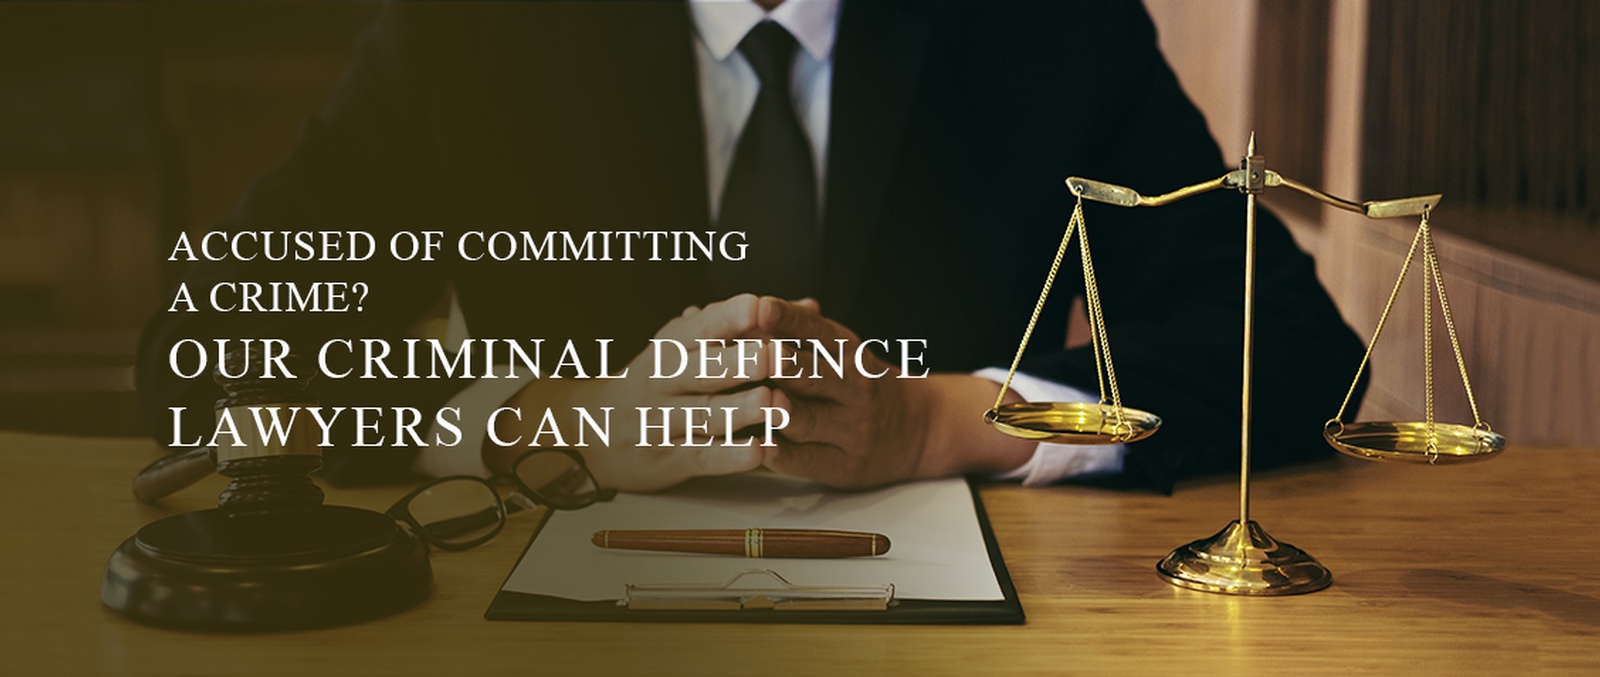 Criminal Defence Lawyer in Mississauga, Ontario